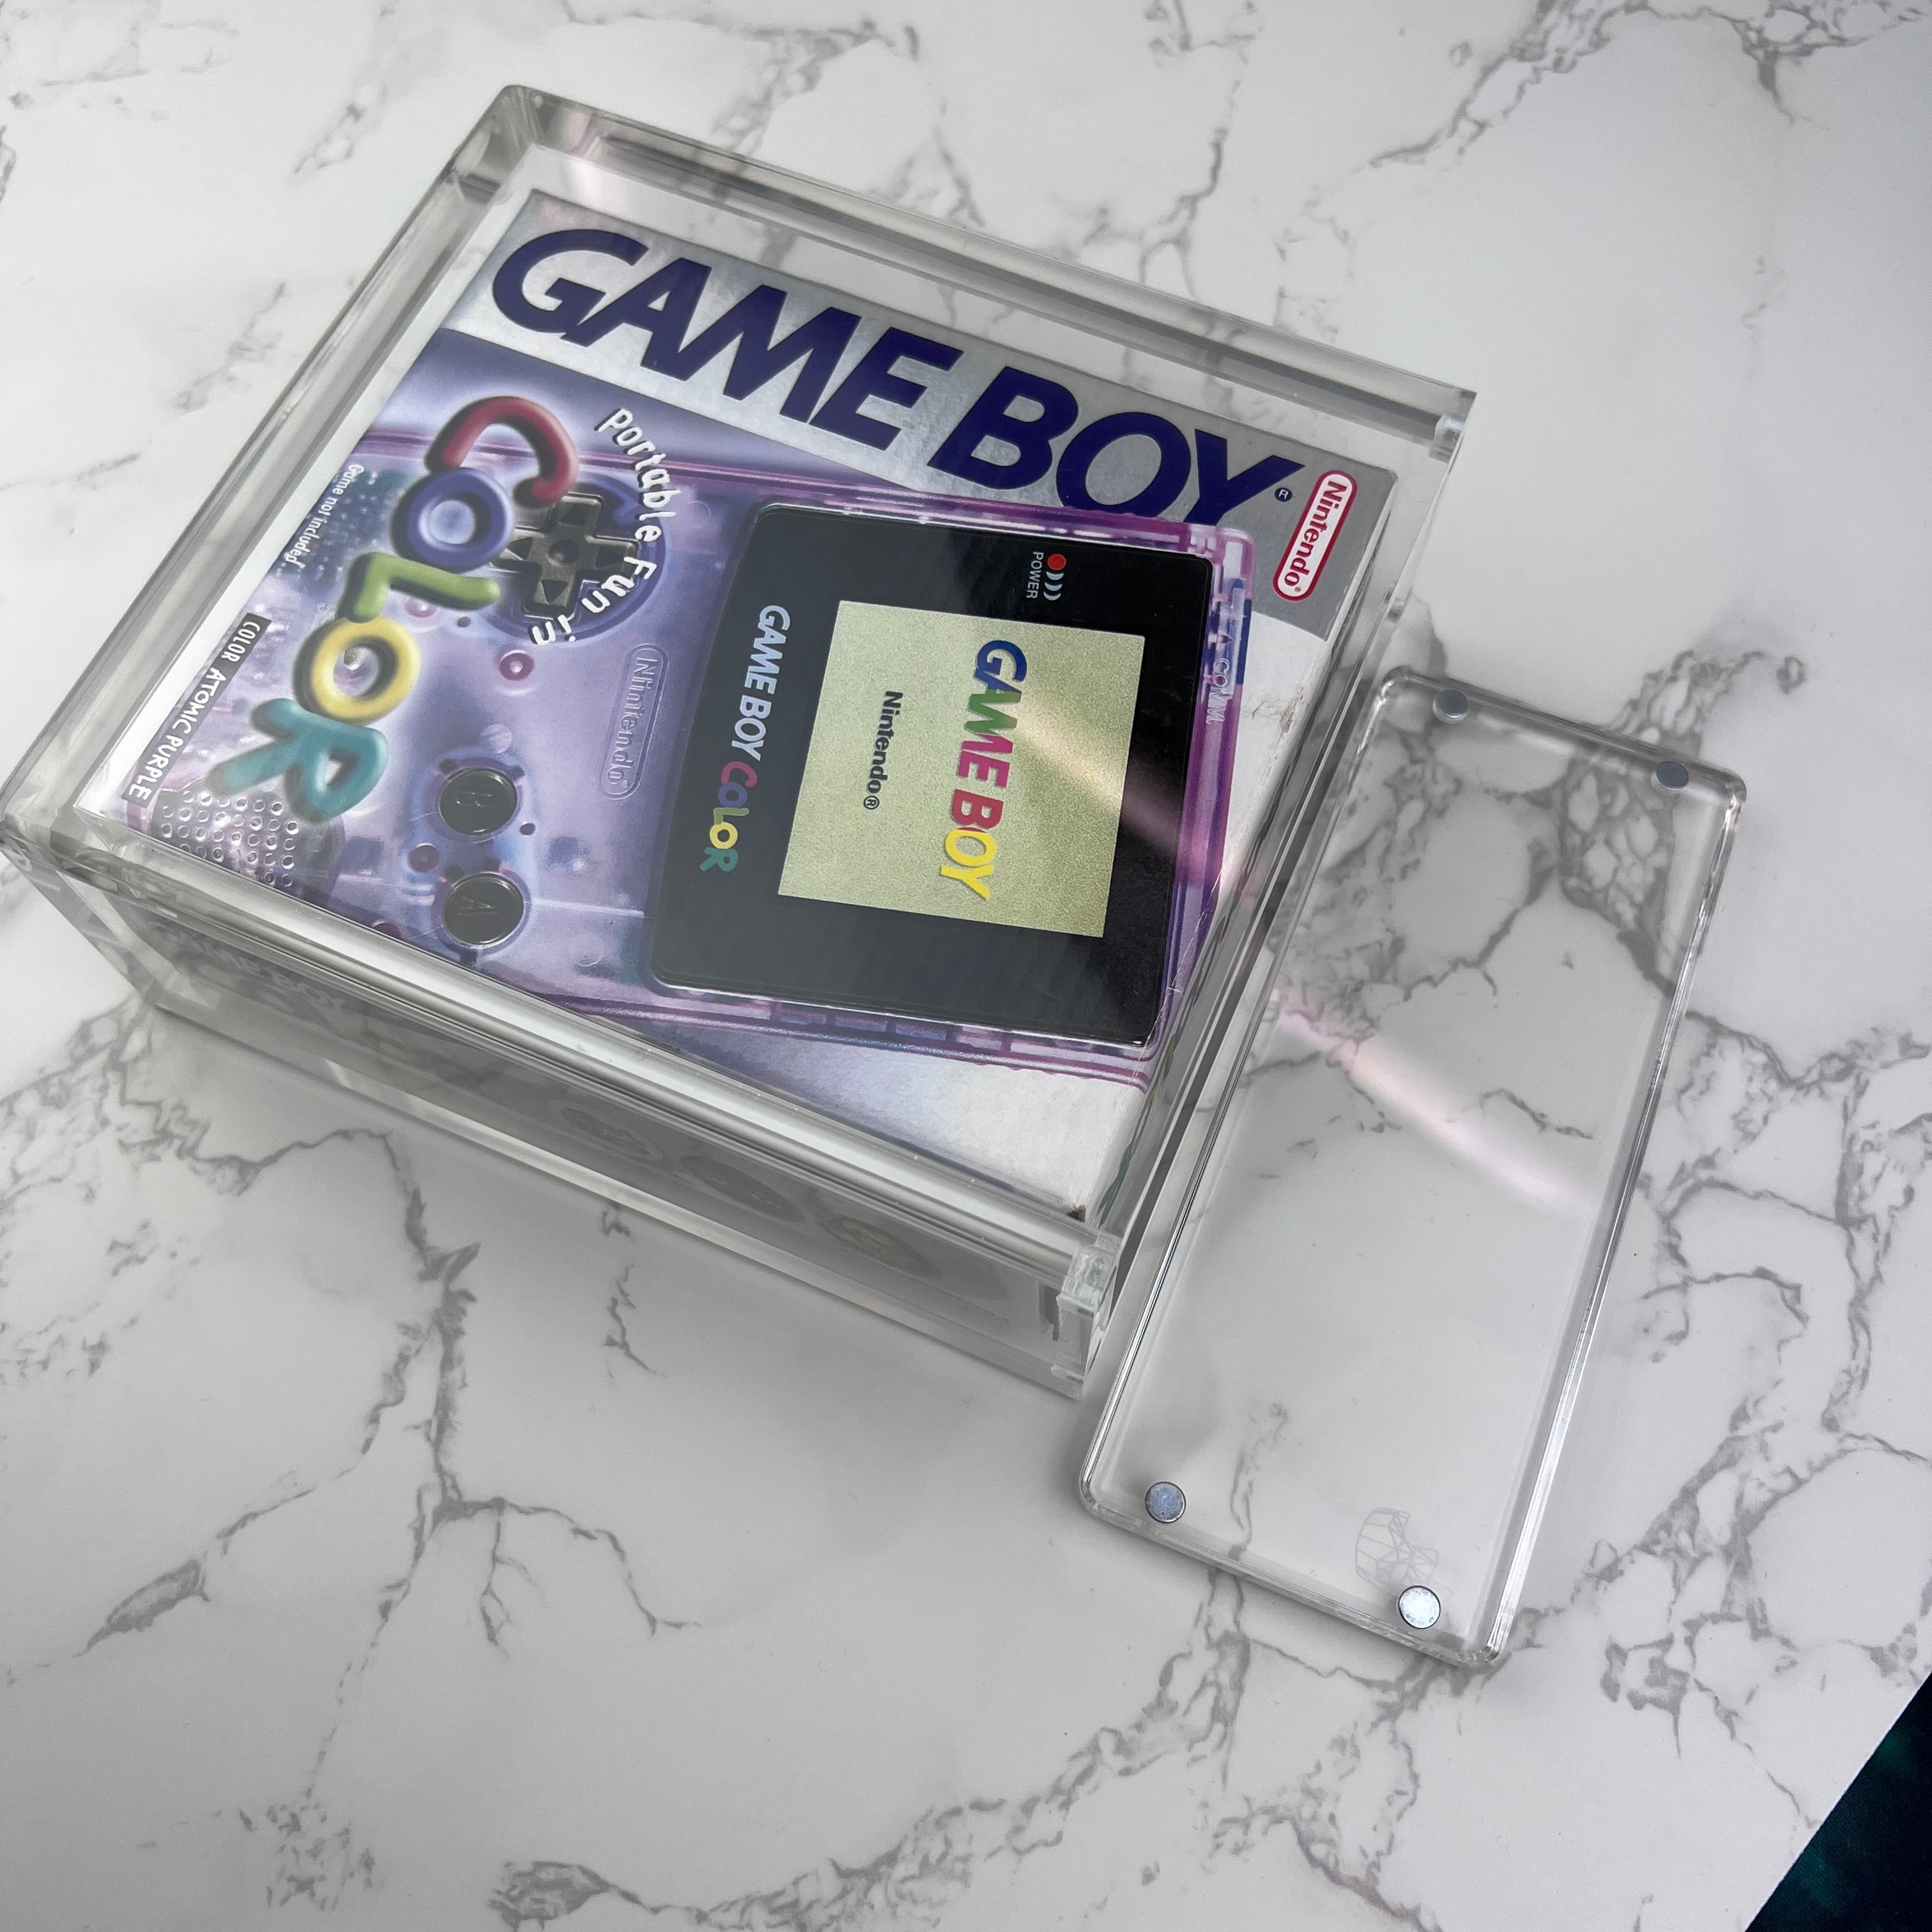 Gameboy Color magnetic acrylic protective case. Crystal clear acrylic, with UV resistance. 